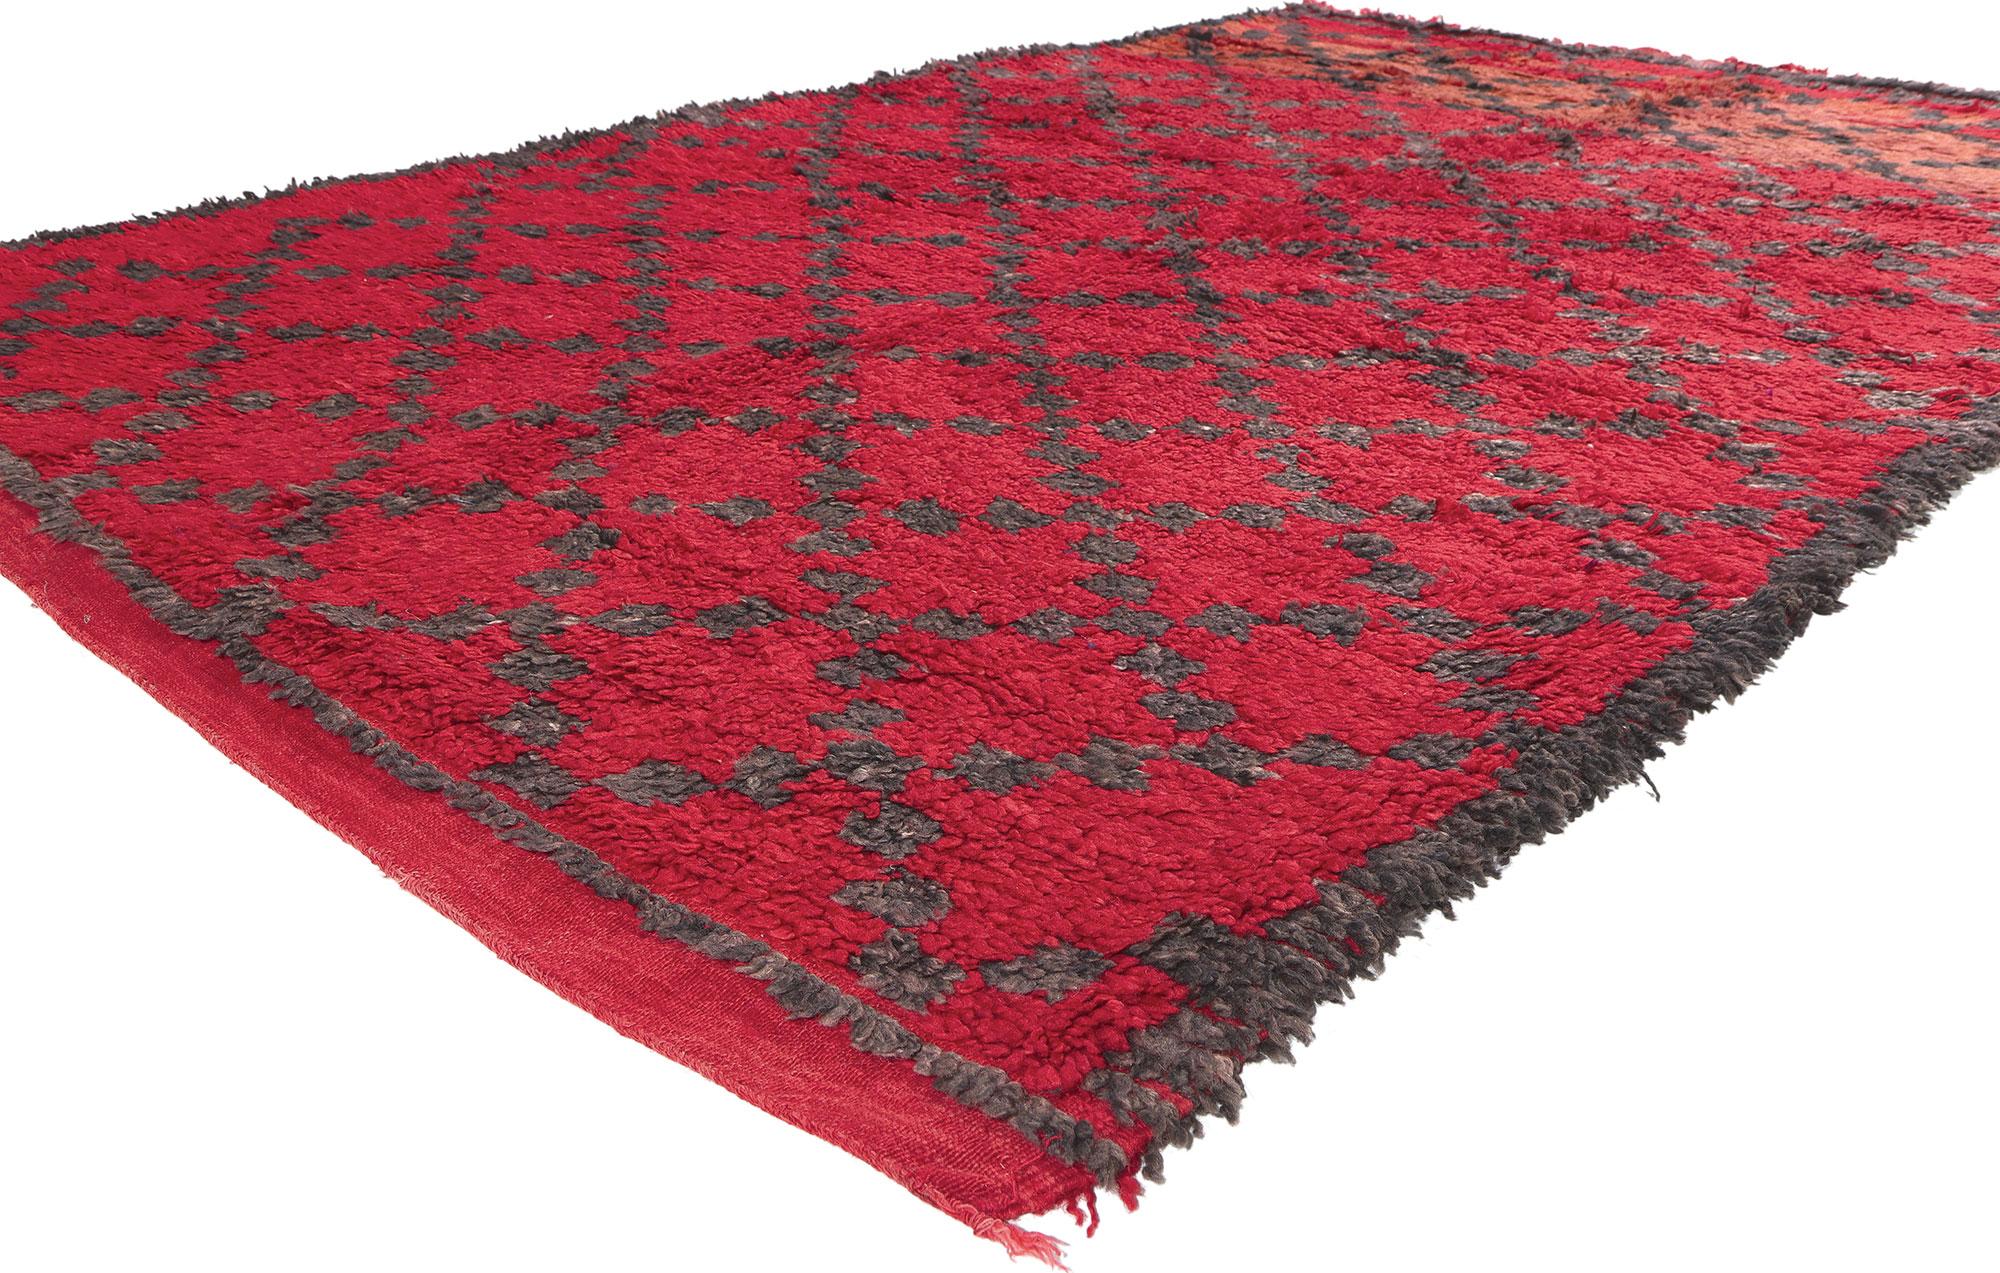 20975 Vintage Red Beni MGuild Moroccan Rug, 05'07 x 09'02. Embark on a vibrant visual odyssey through the rich history of Moroccan culture with our hand-knotted Beni MGuild vintage rug—a dazzling masterpiece that seamlessly melds hues, patterns, and